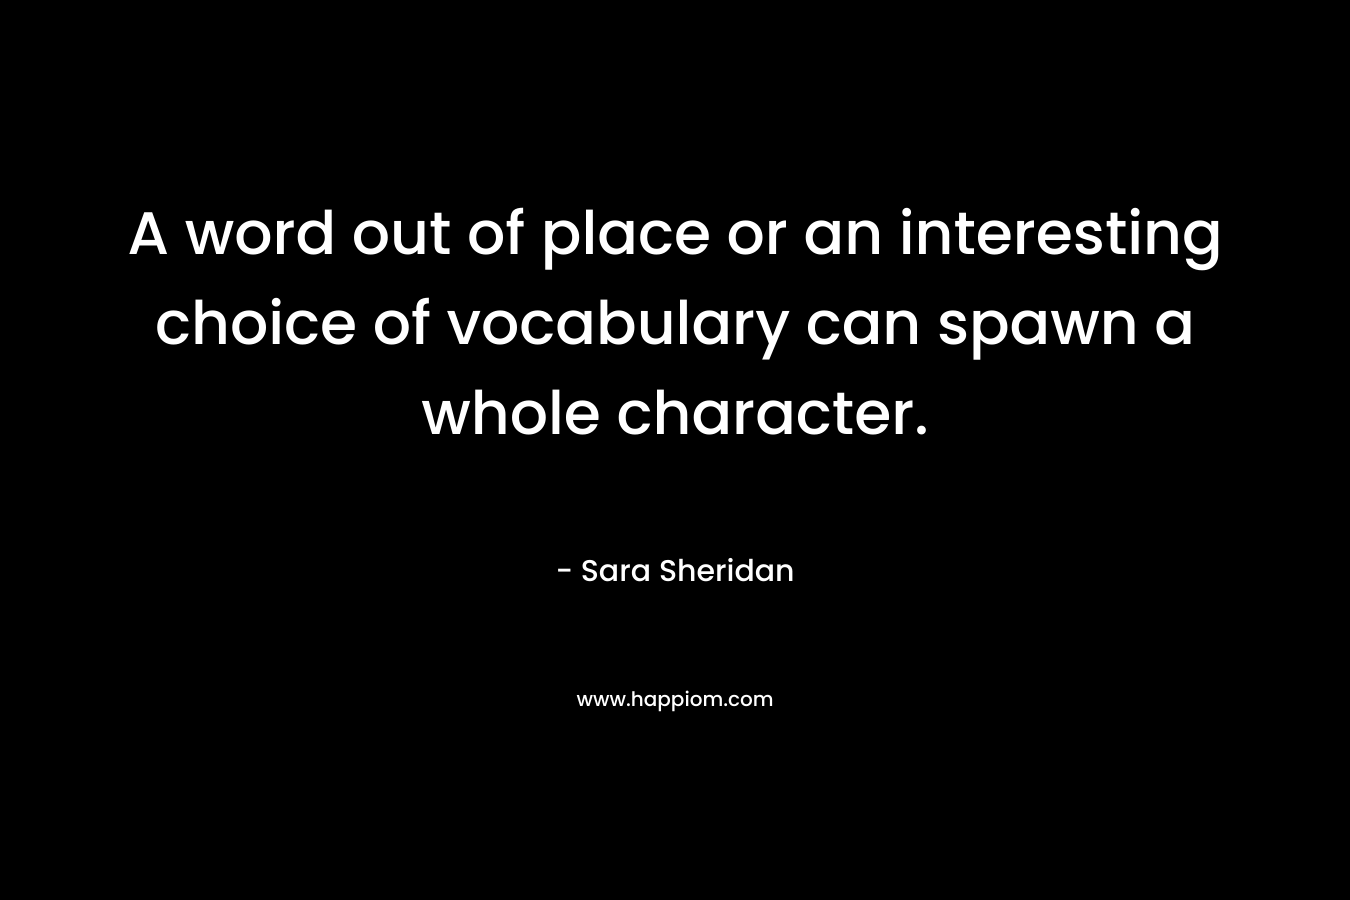 A word out of place or an interesting choice of vocabulary can spawn a whole character. – Sara Sheridan